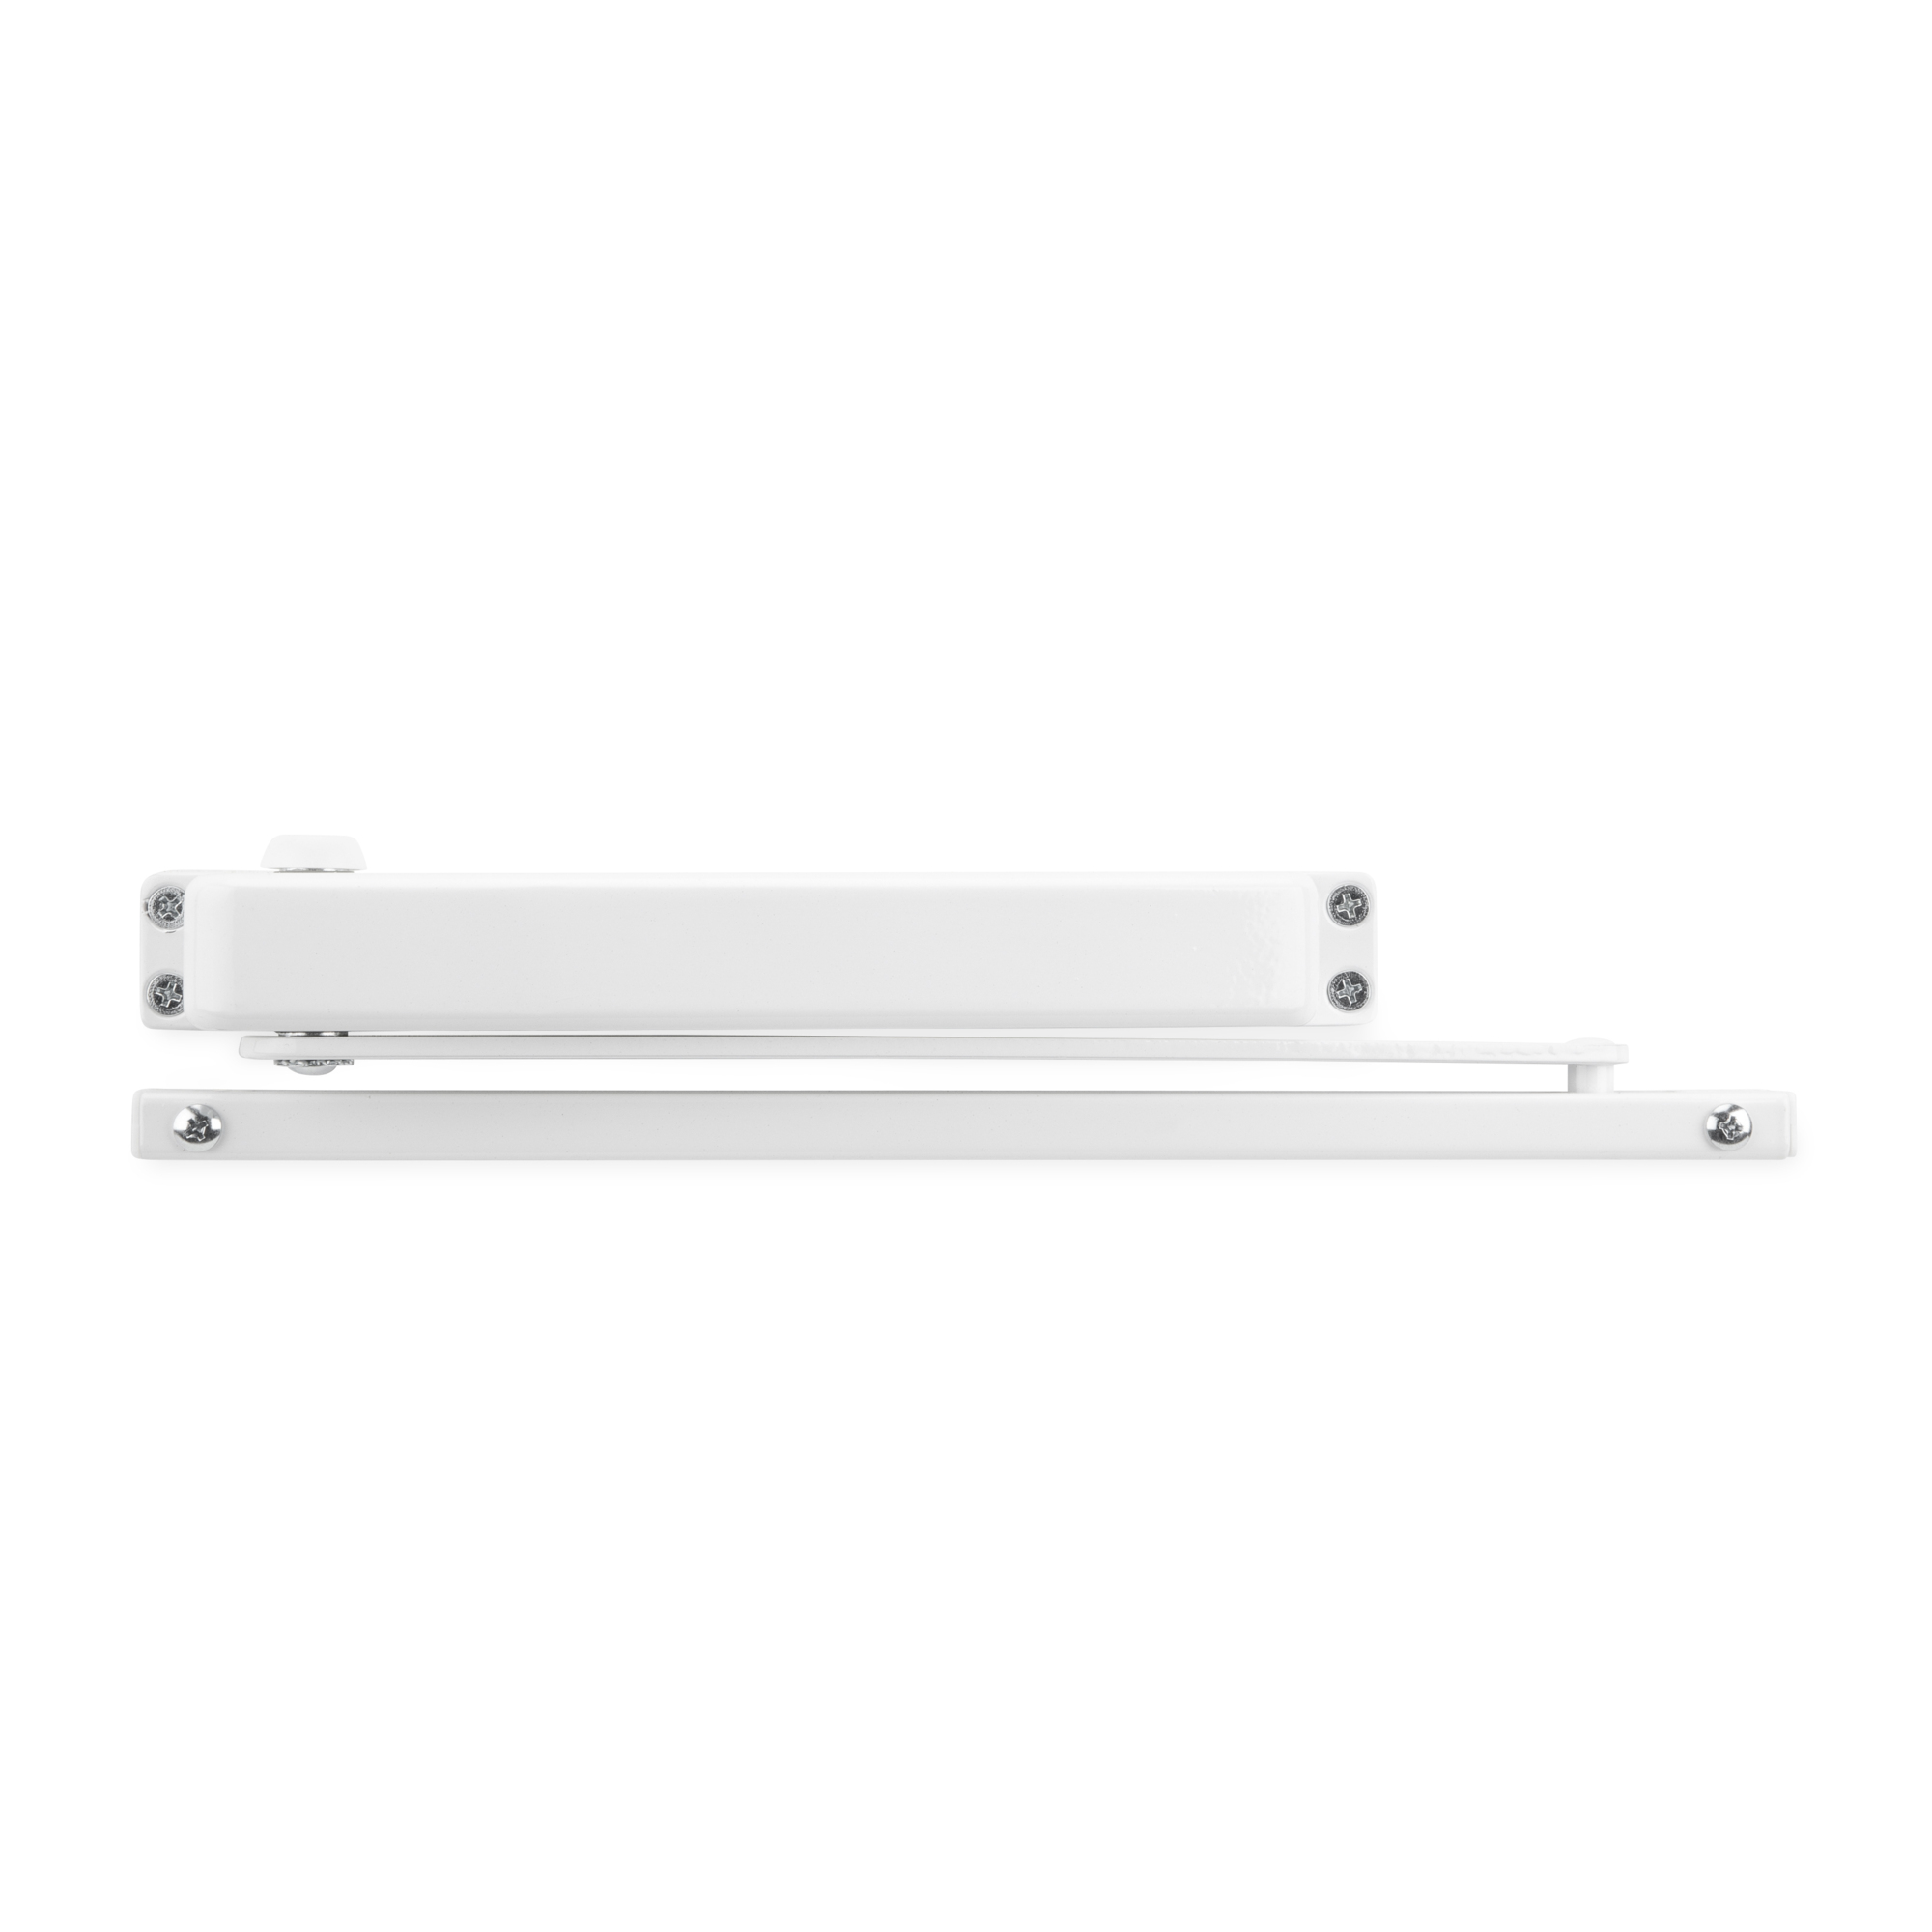 Global Door Controls, Residential Hold Open Mini Door Closer in White, Load Capacity 150 lb, Model TC901-HO-WH